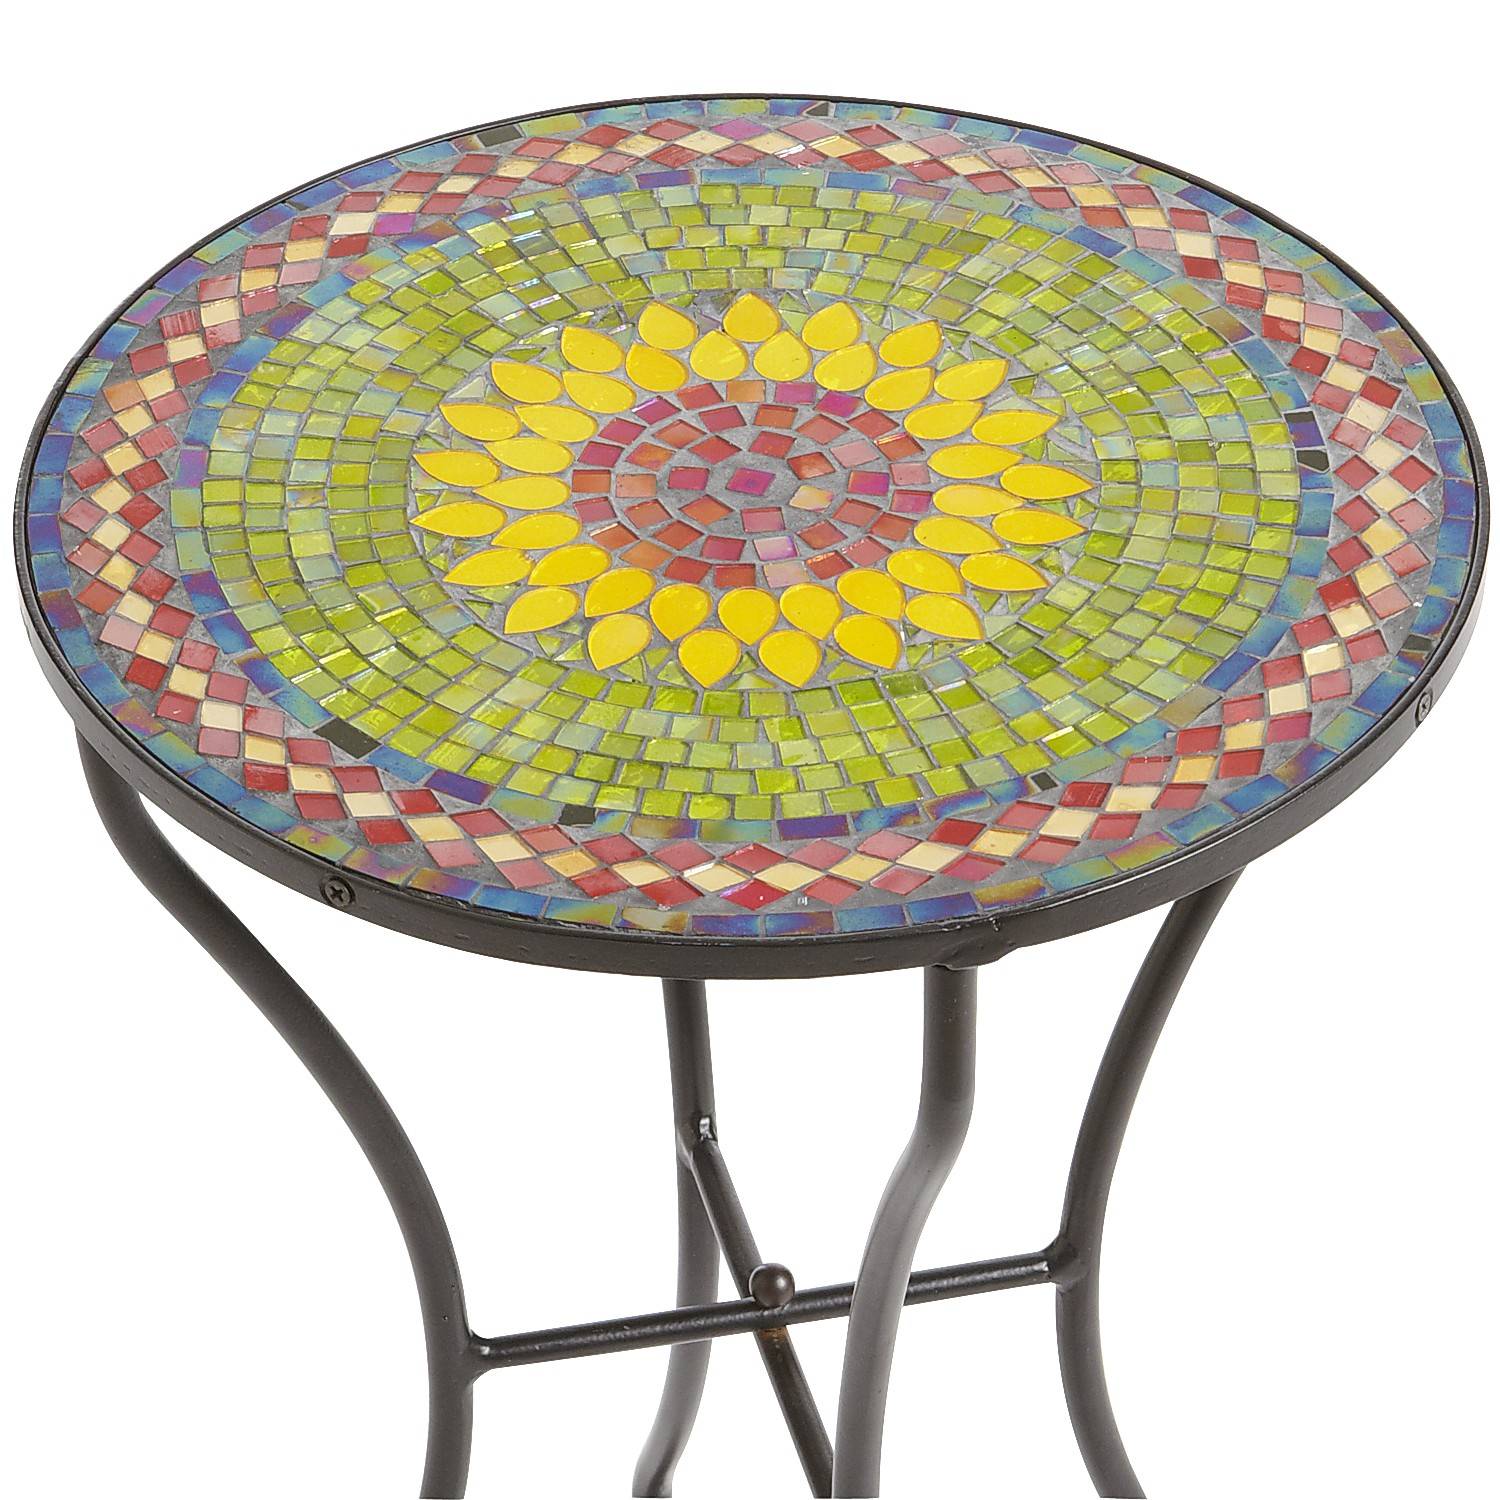 Another Sun Mosaic Tile Table